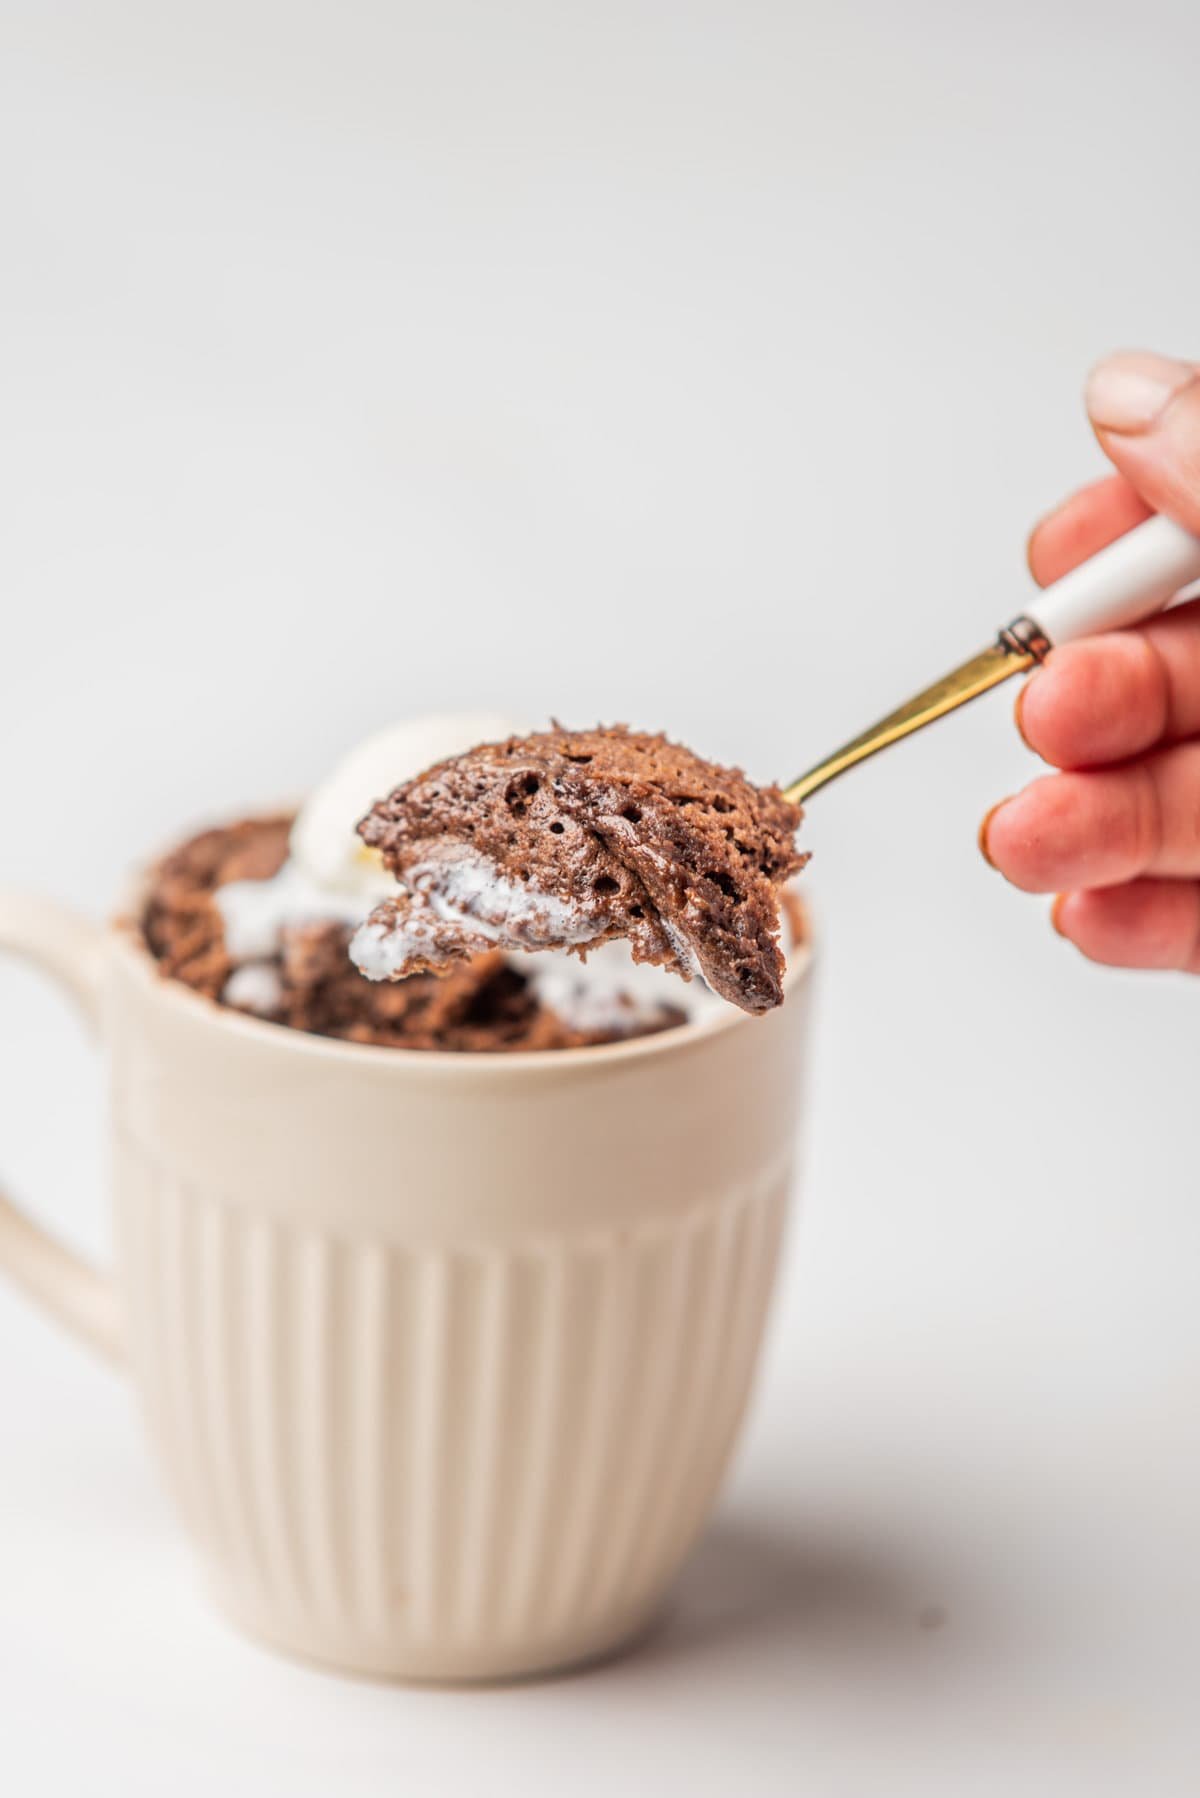 An image of a hand scooping out a spoonful of chocolate mug cake.